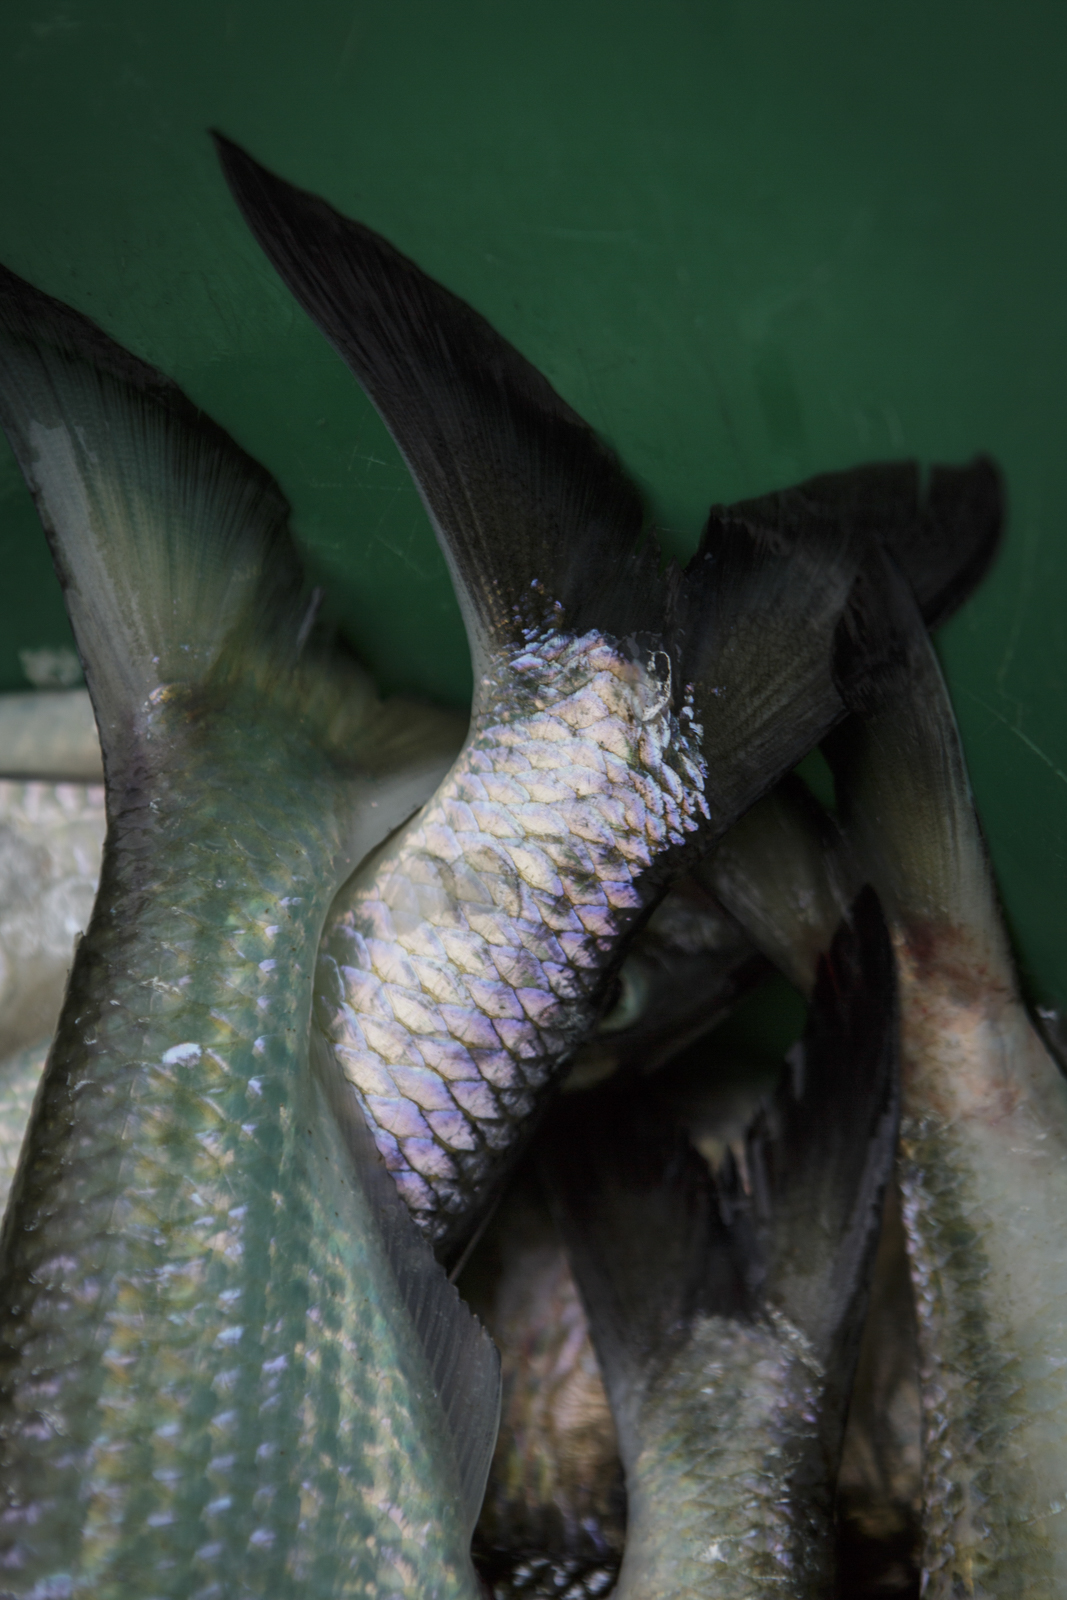  American shad are known for their shiny, reflective scales. Here, the fish have been collected for the restocking program.  